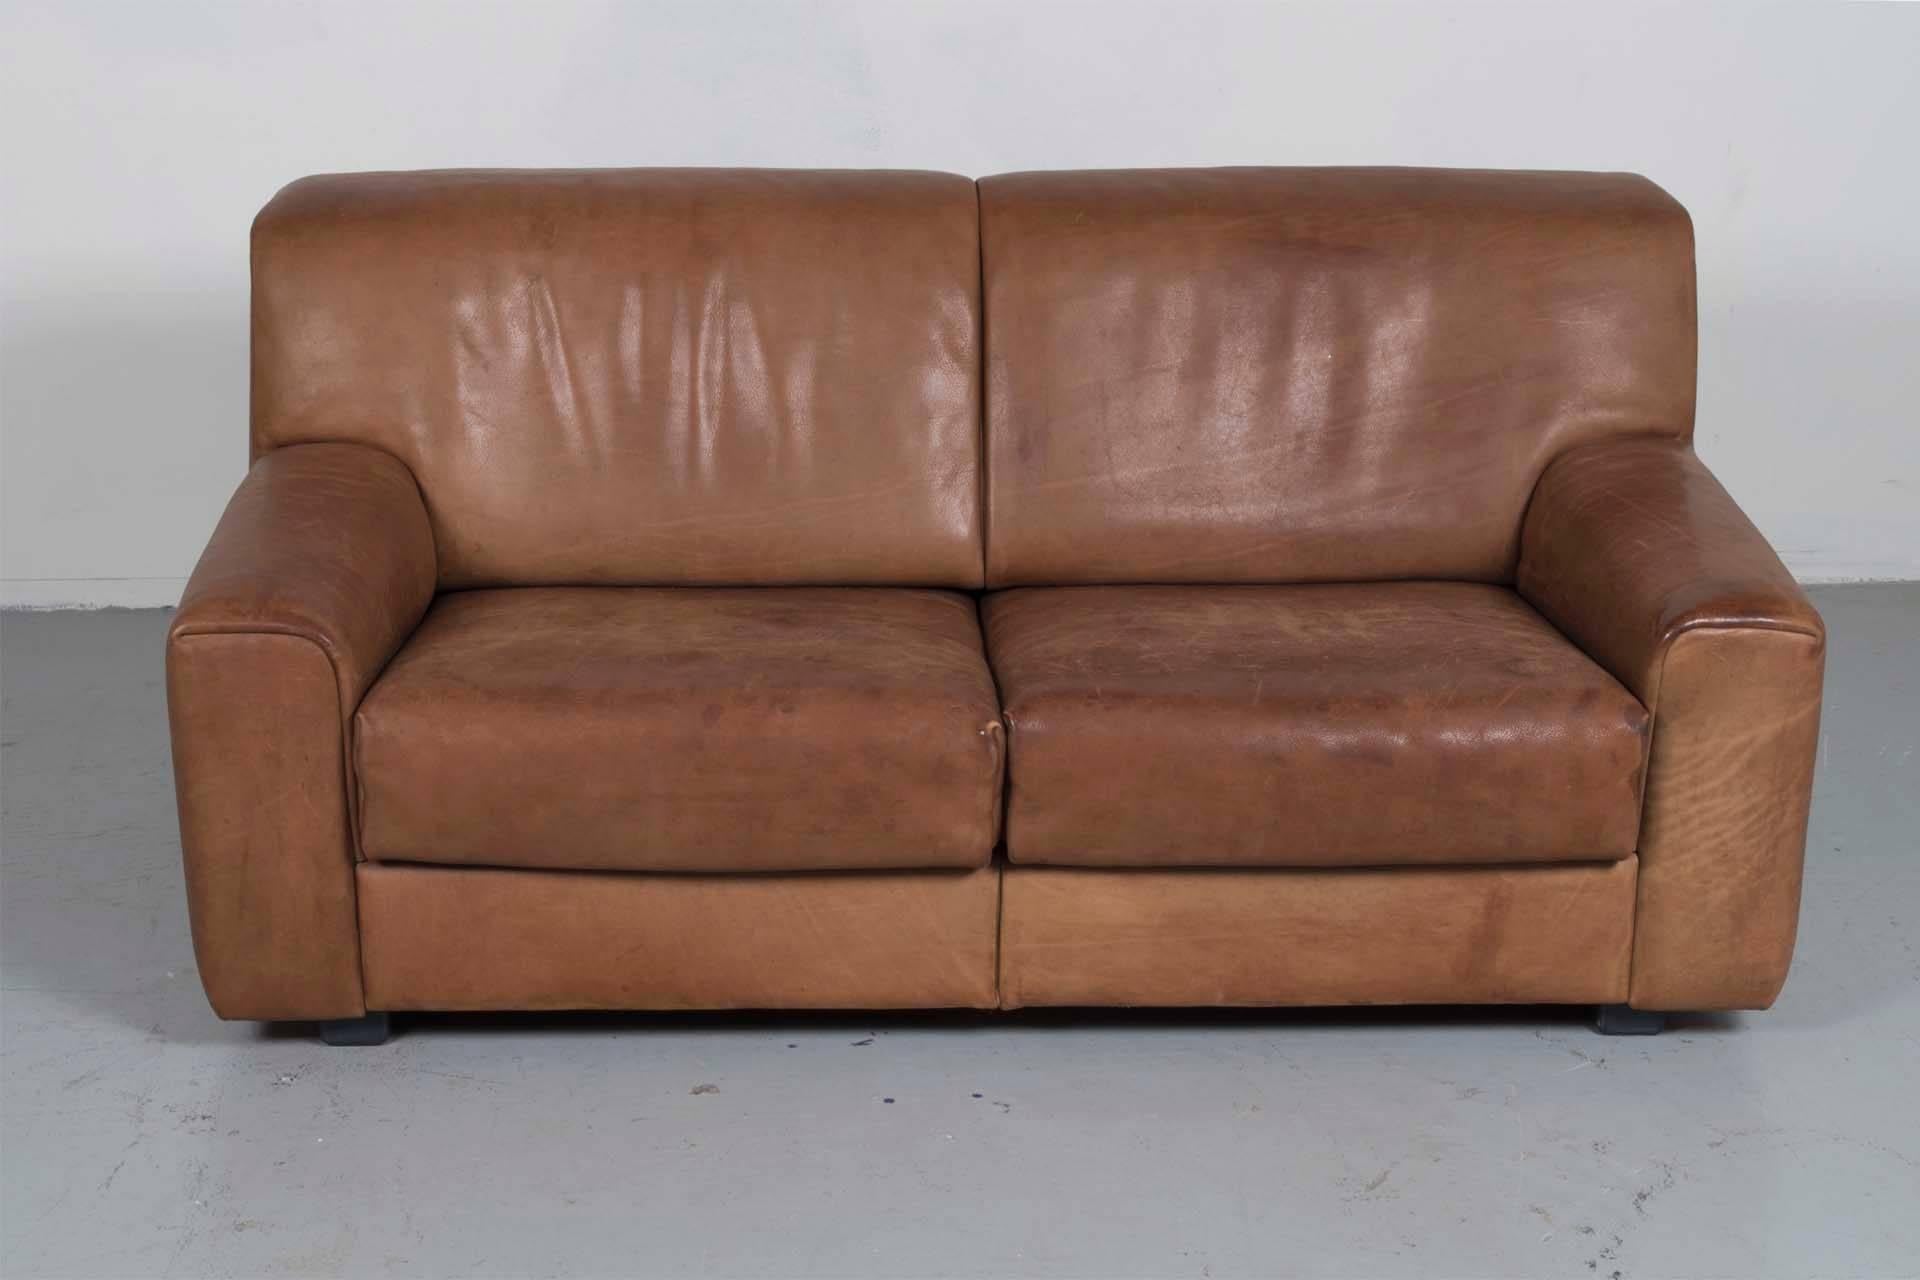 Very nice and heavy DS-42 couch from the famous Swiss brand De Sede. Fully upholstered in the 5 mm thick bull-leather, on a solid oak wooden frame. The two cushions can be removed to clean the sofa. The comfort is very good, thanks to the top